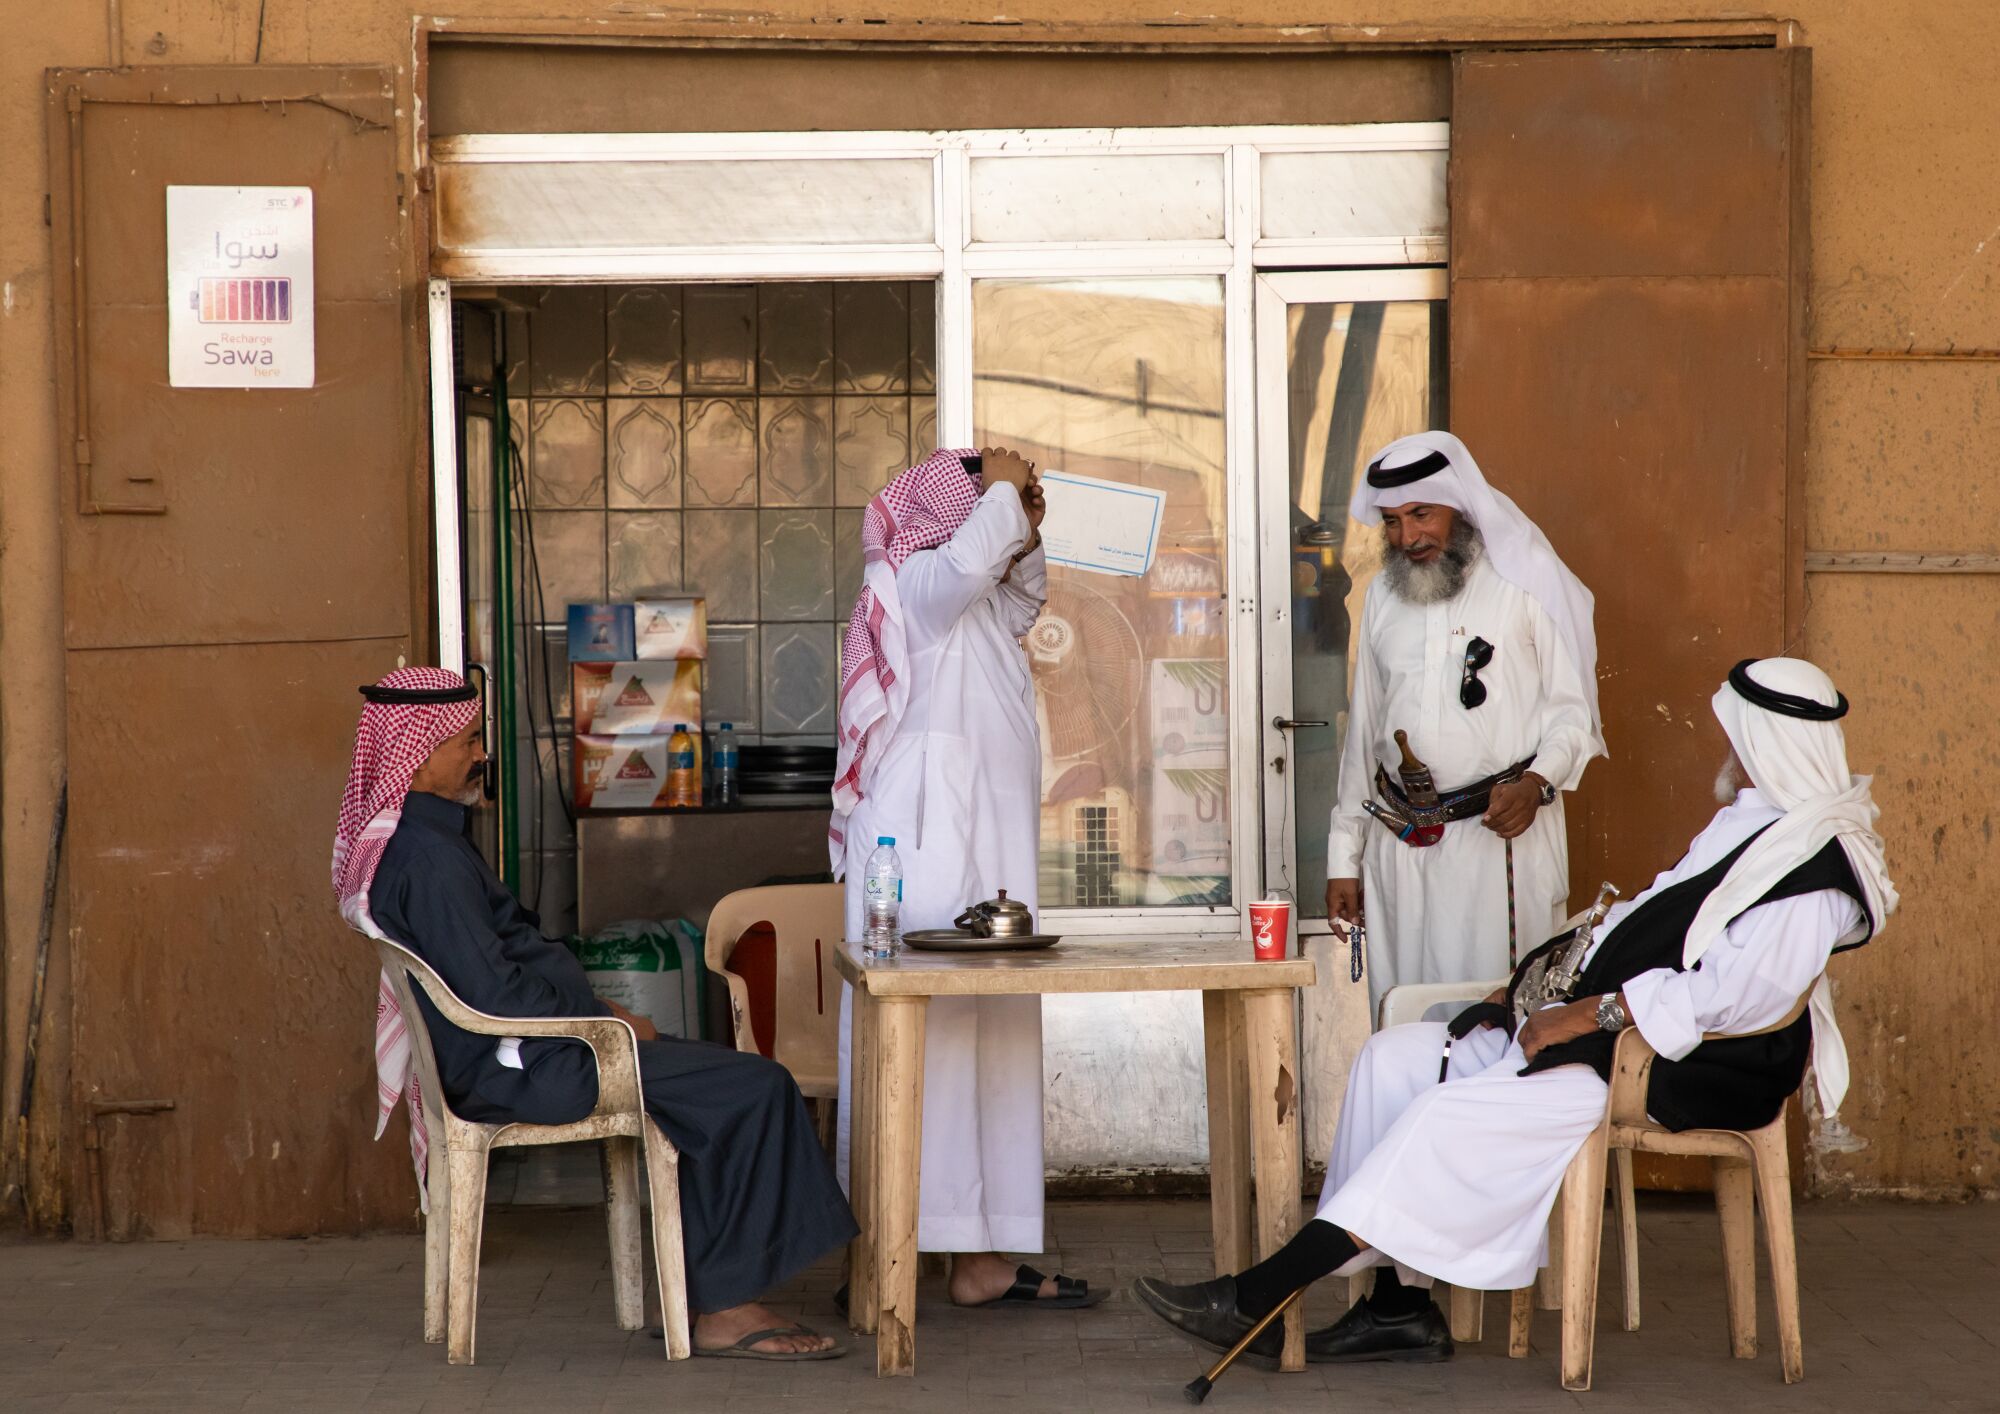 Saudi men gather at an outdoor table to drink coffee.